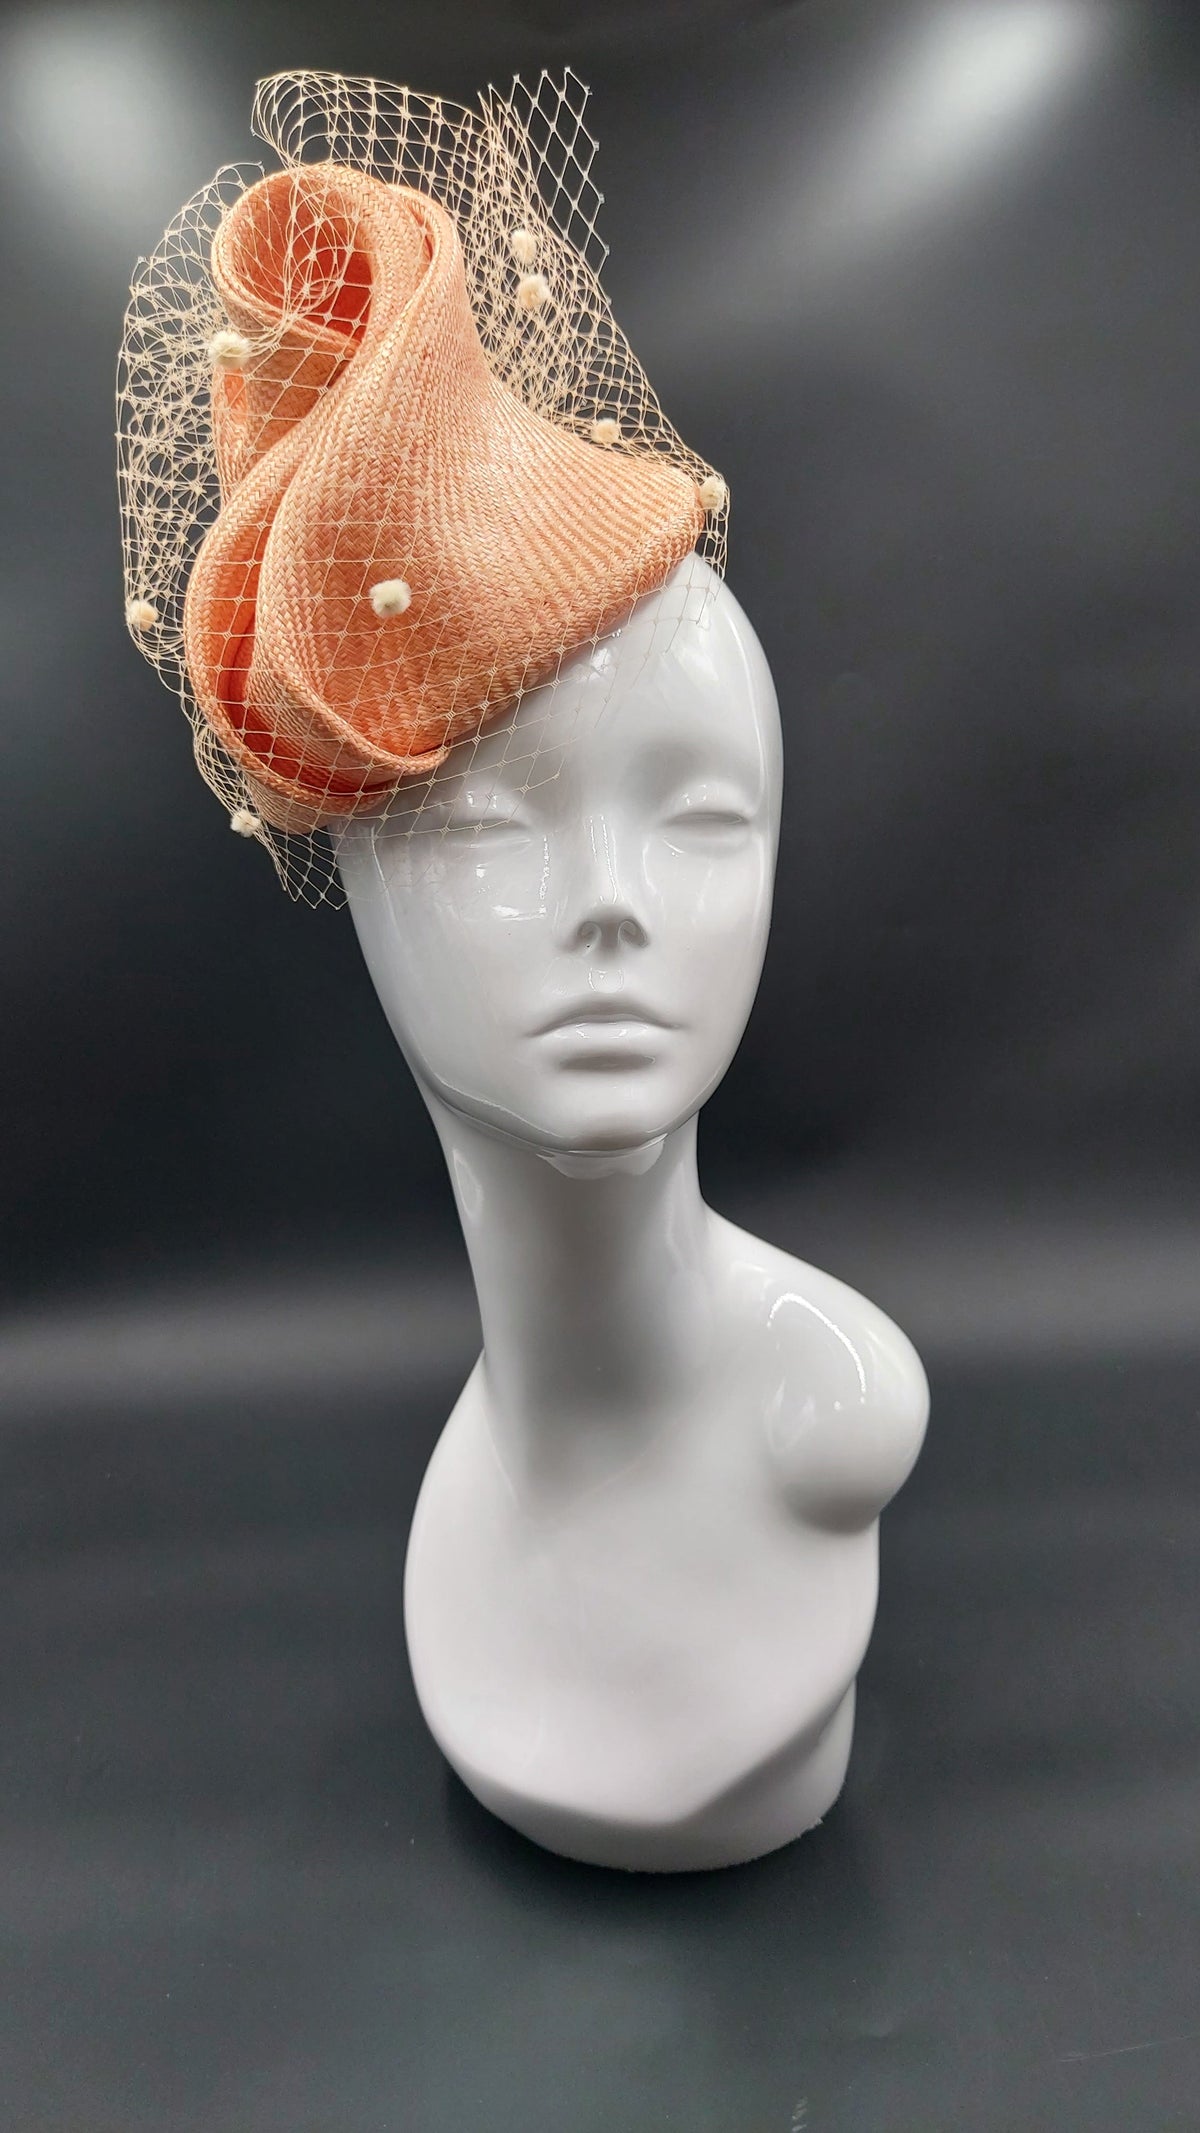 Joanne: Couture hat/Fascinator